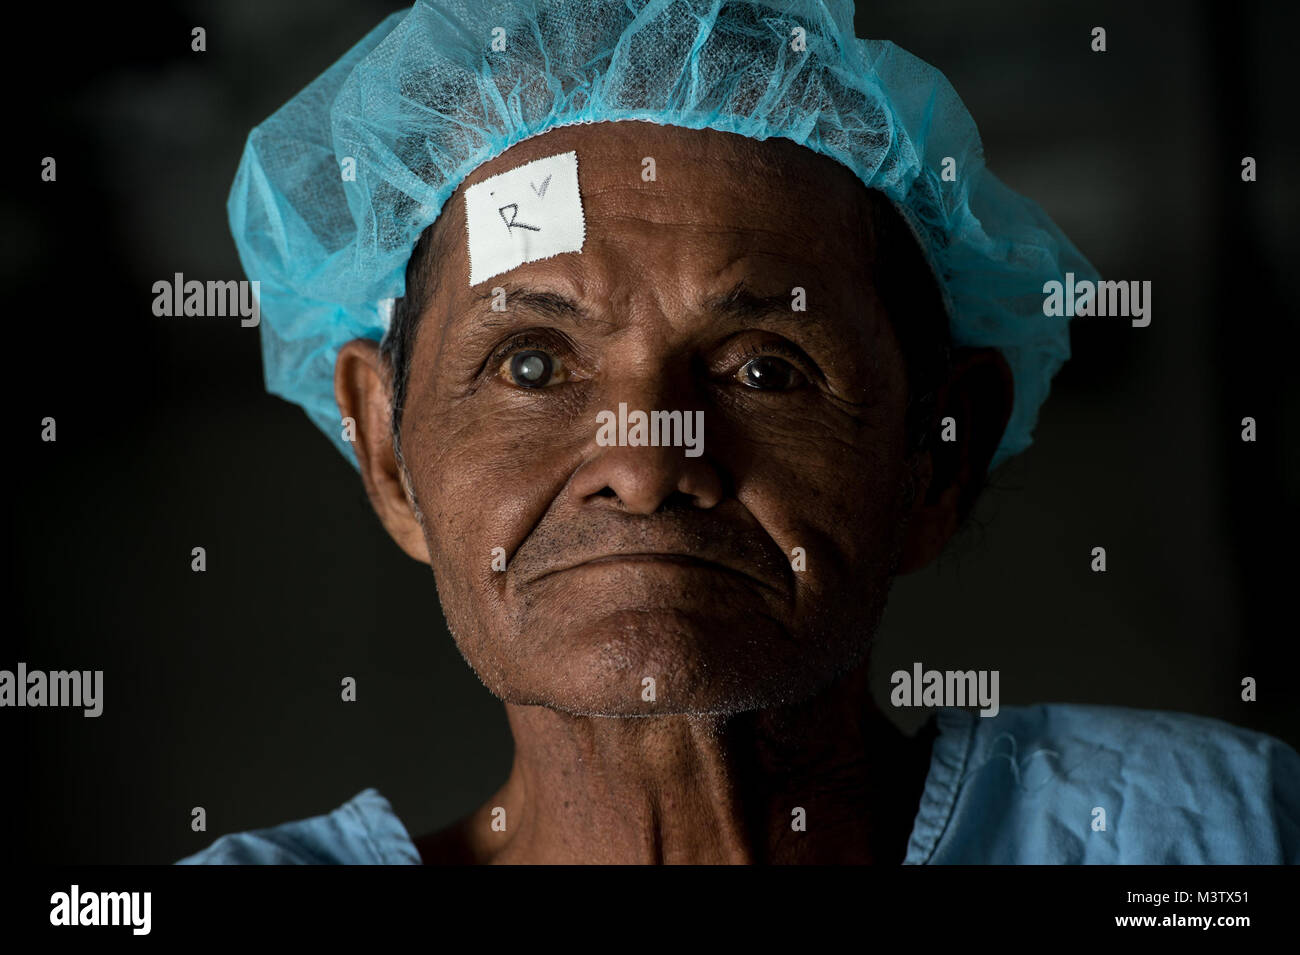 Pedro Gonzalez, age 71, waits for his extracapsular cataract extraction with intraocular implant surgery at the Centro Hospitalario Luis 'Chicho' Fabrega, Santiago, Panama, Feb. 6, 2017, during a medical readiness training exercise. A U.S. military medical team was in Panama to help treat individuals with cataracts that otherwise would have gone untreated. Medical readiness training exercises provide U.S. military personnel training in delivery of medical care in austere conditions, promote diplomatic relations between the U.S. and host nations in Central America and provide humanitarian and c Stock Photo